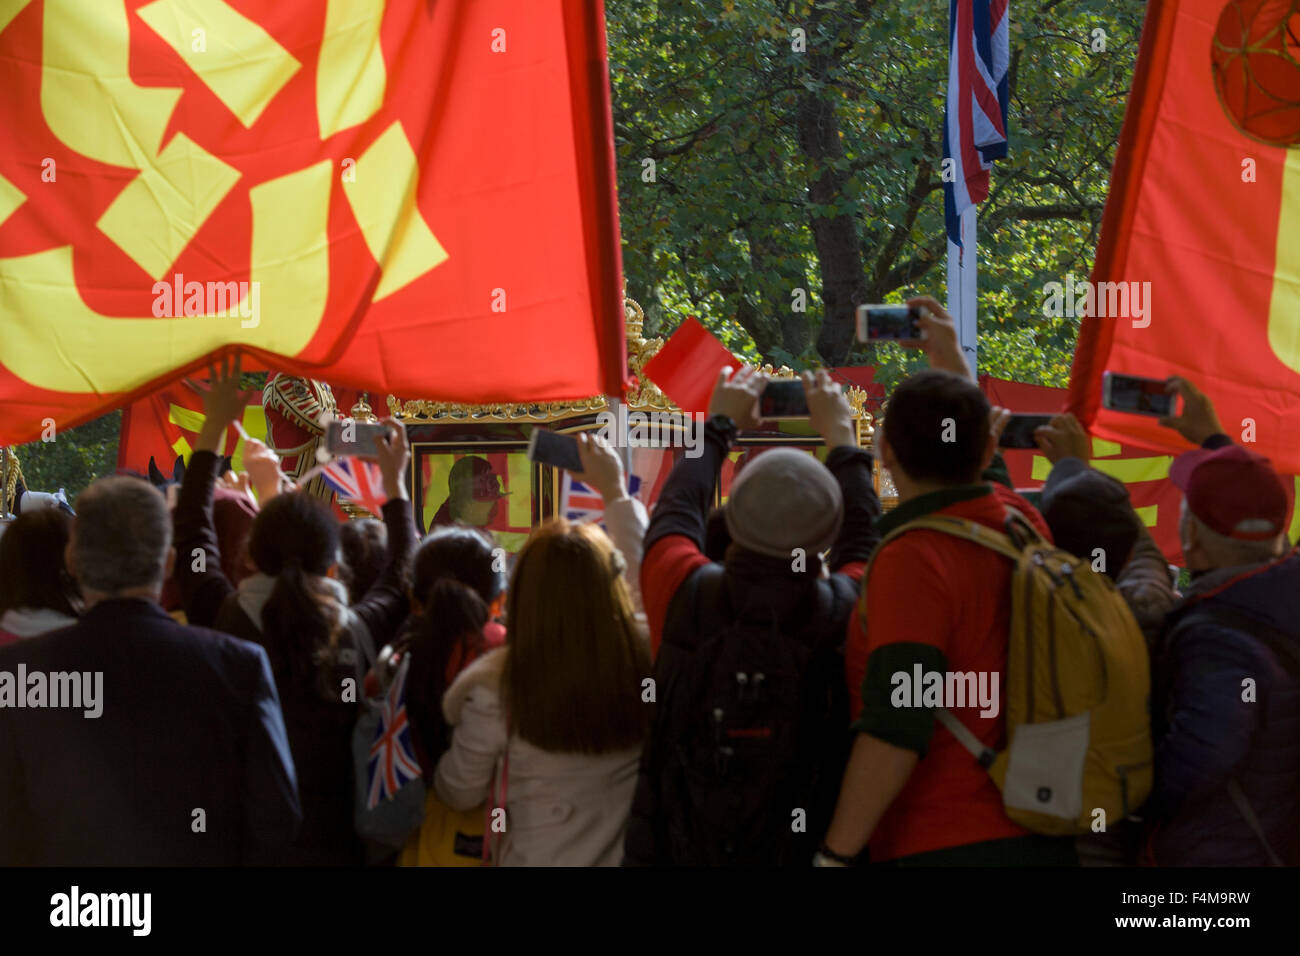 London, 20th October 2015. As crowds of supporters and protesters line the Mall in central London, Chinese leader Xi Jinping starts off his state visit to Britain. There is much attached to Anglo-Sino relations and this series of trade and diplomatic events is of great importance to the UK government in terms of new business and investment. Protesters however, voiced their distaste at human rights issues for dissenters and of the occupation of Tibet. Copyright Richard Baker / Alamy Live News. Stock Photo